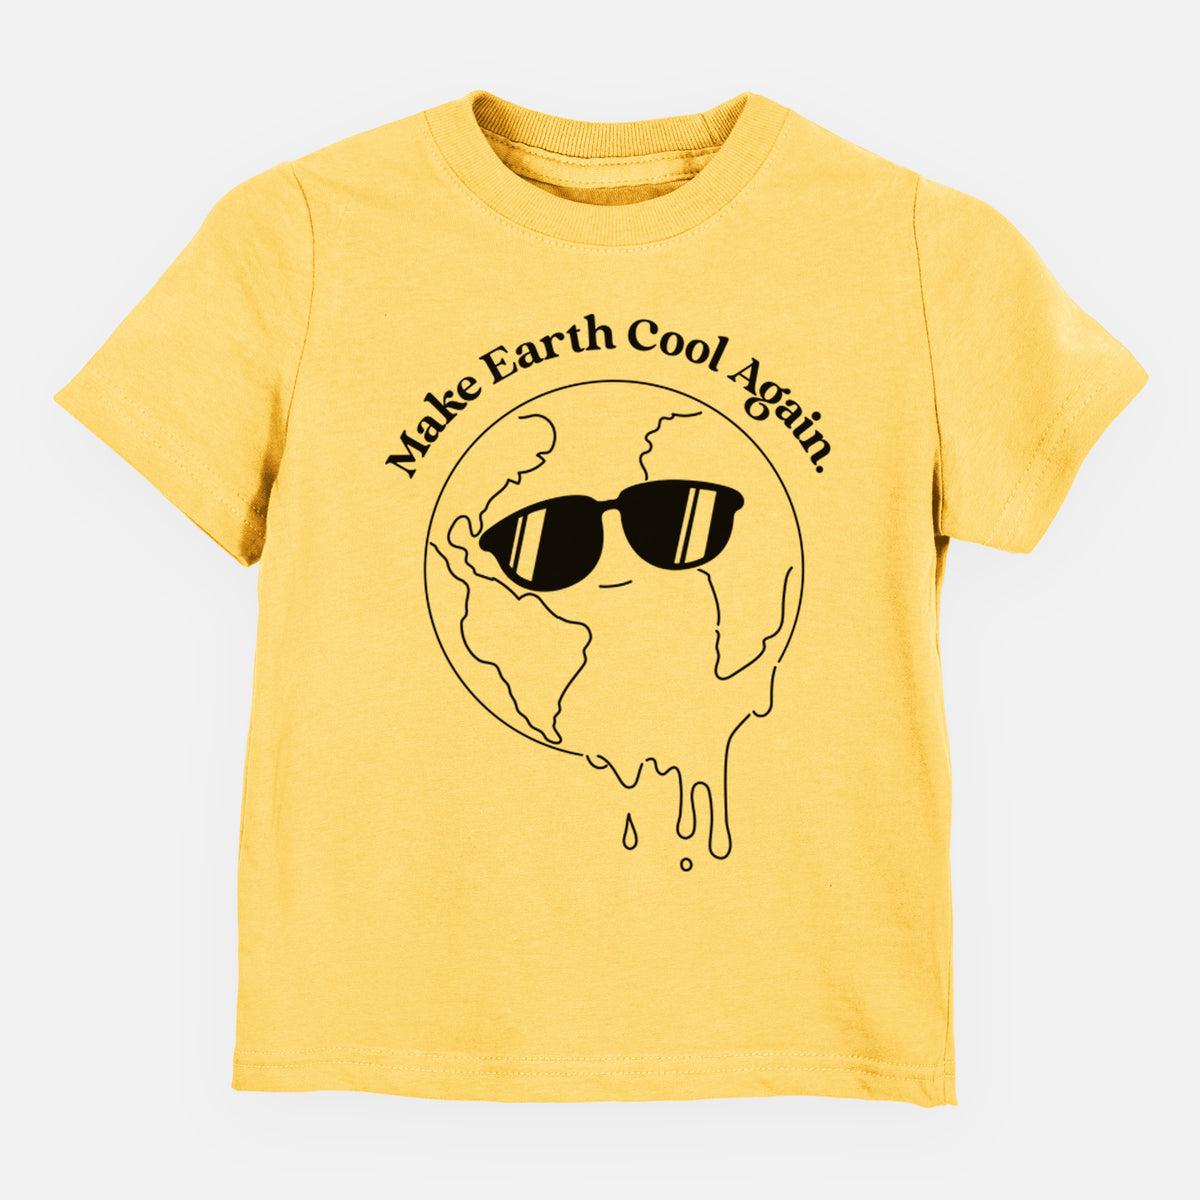 Make Earth Cool Again - Melted Planet - Kids Shirt